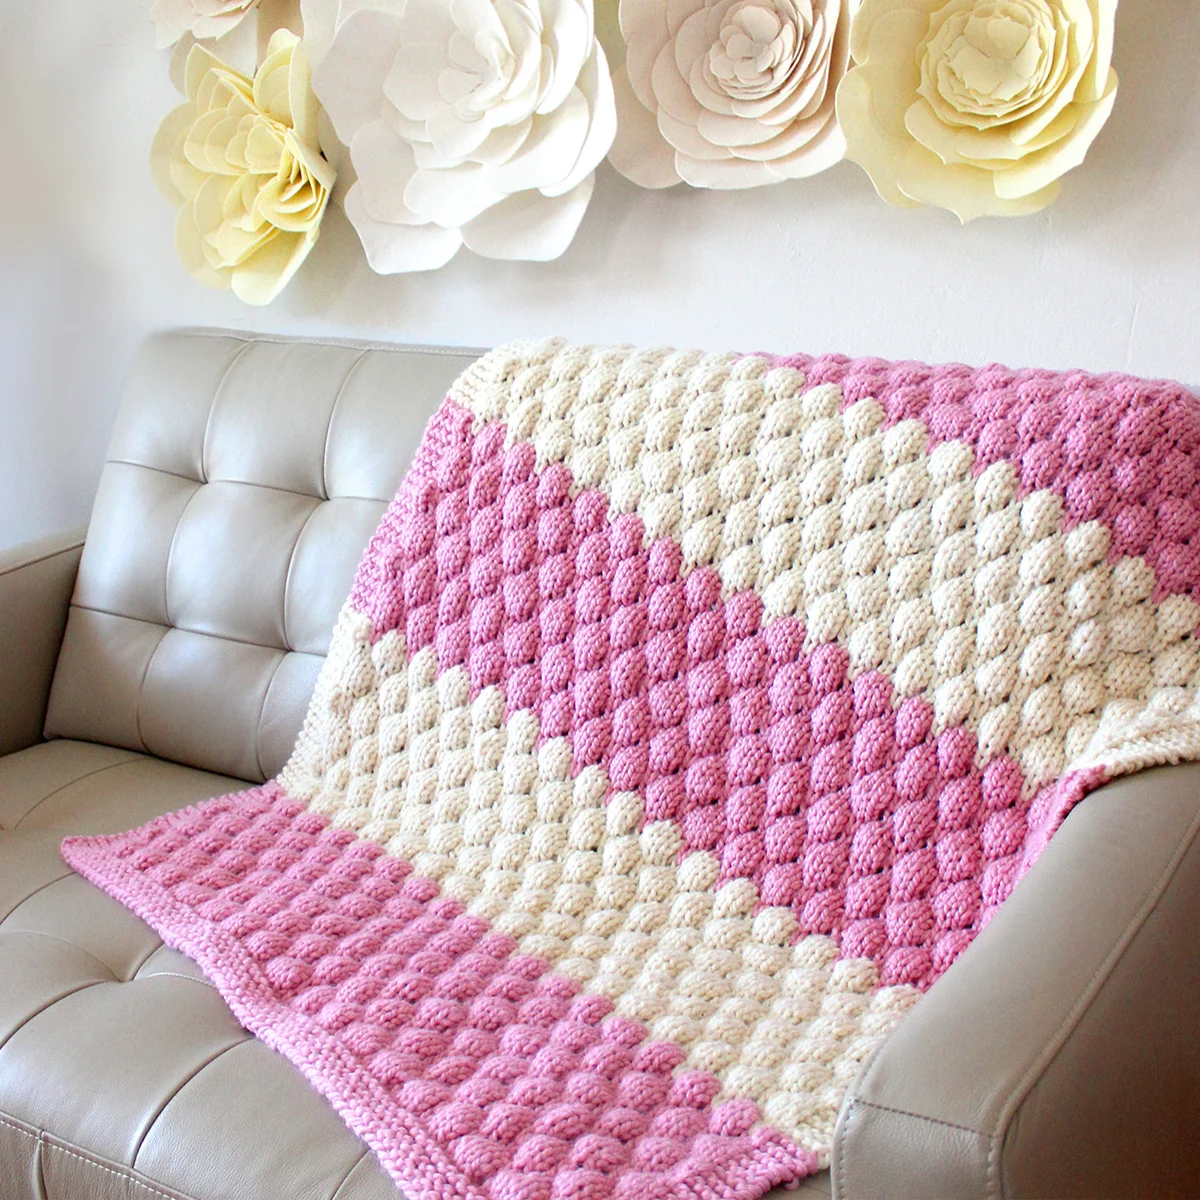 Knitted Bubble Stitch Blanket in pink and white yarn colors on a couch and felt flowers on the wall.